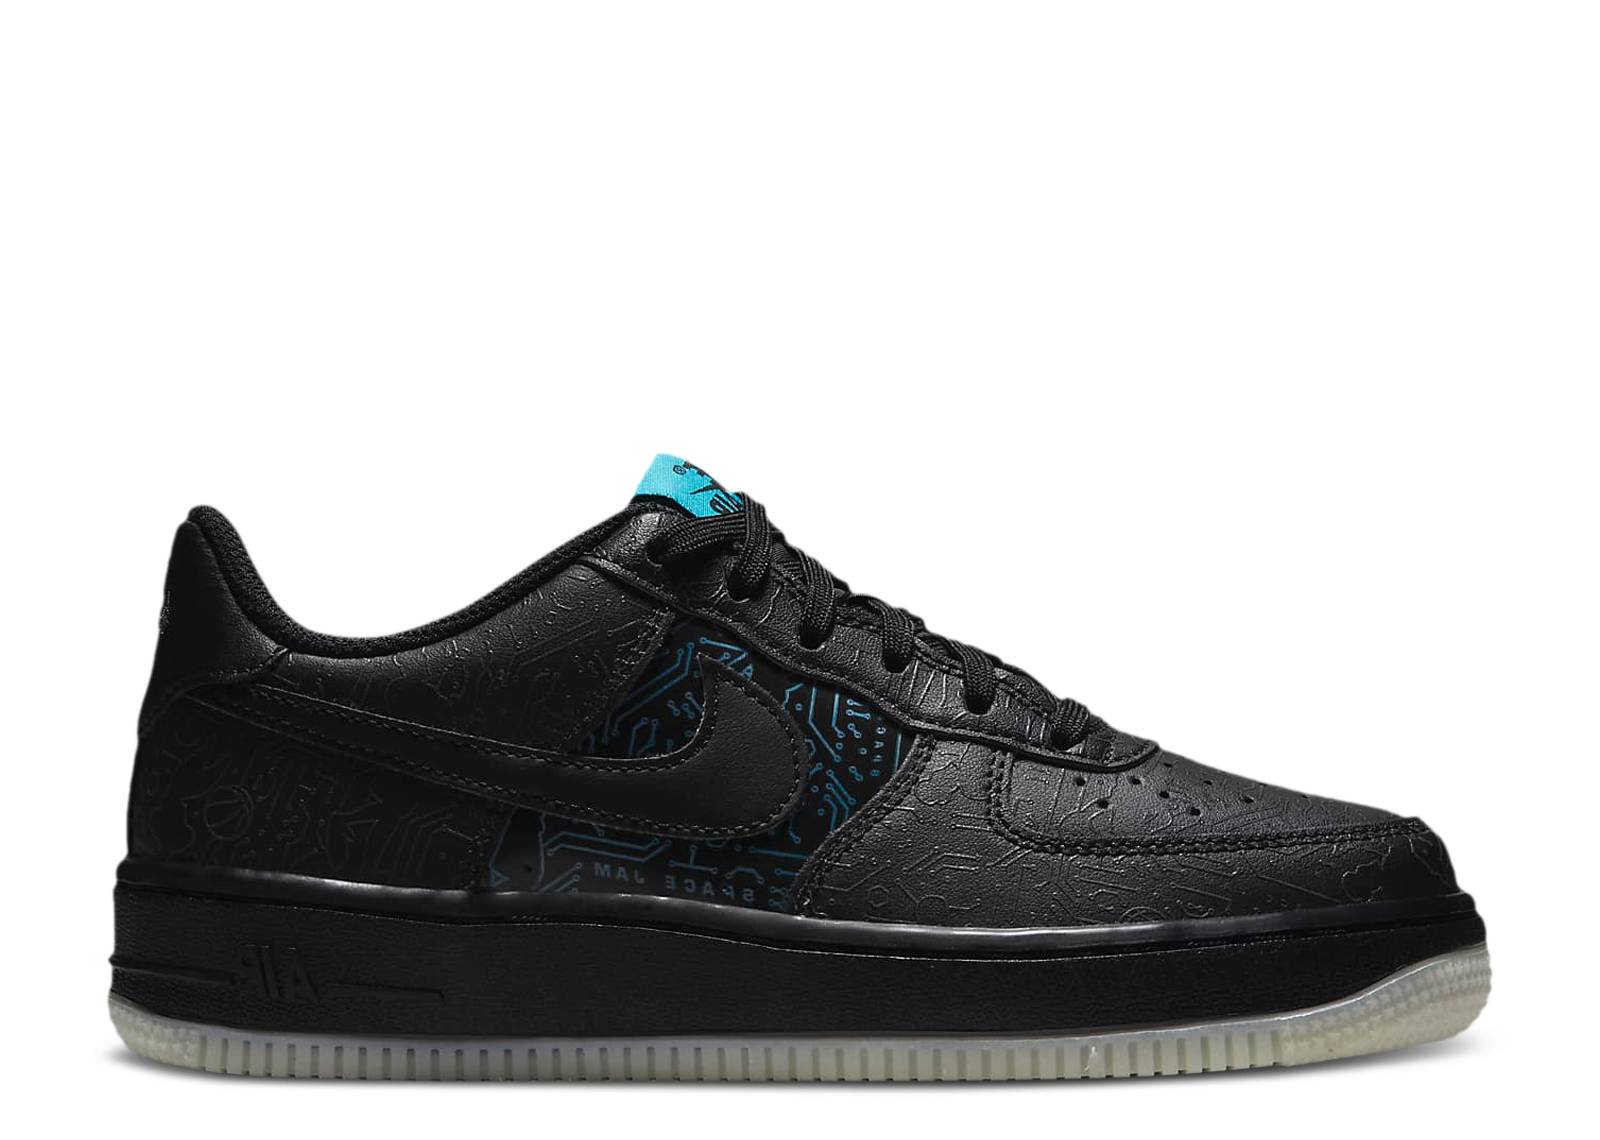 Space Jam x Air Force 1 '06 GS 'Computer Chip'